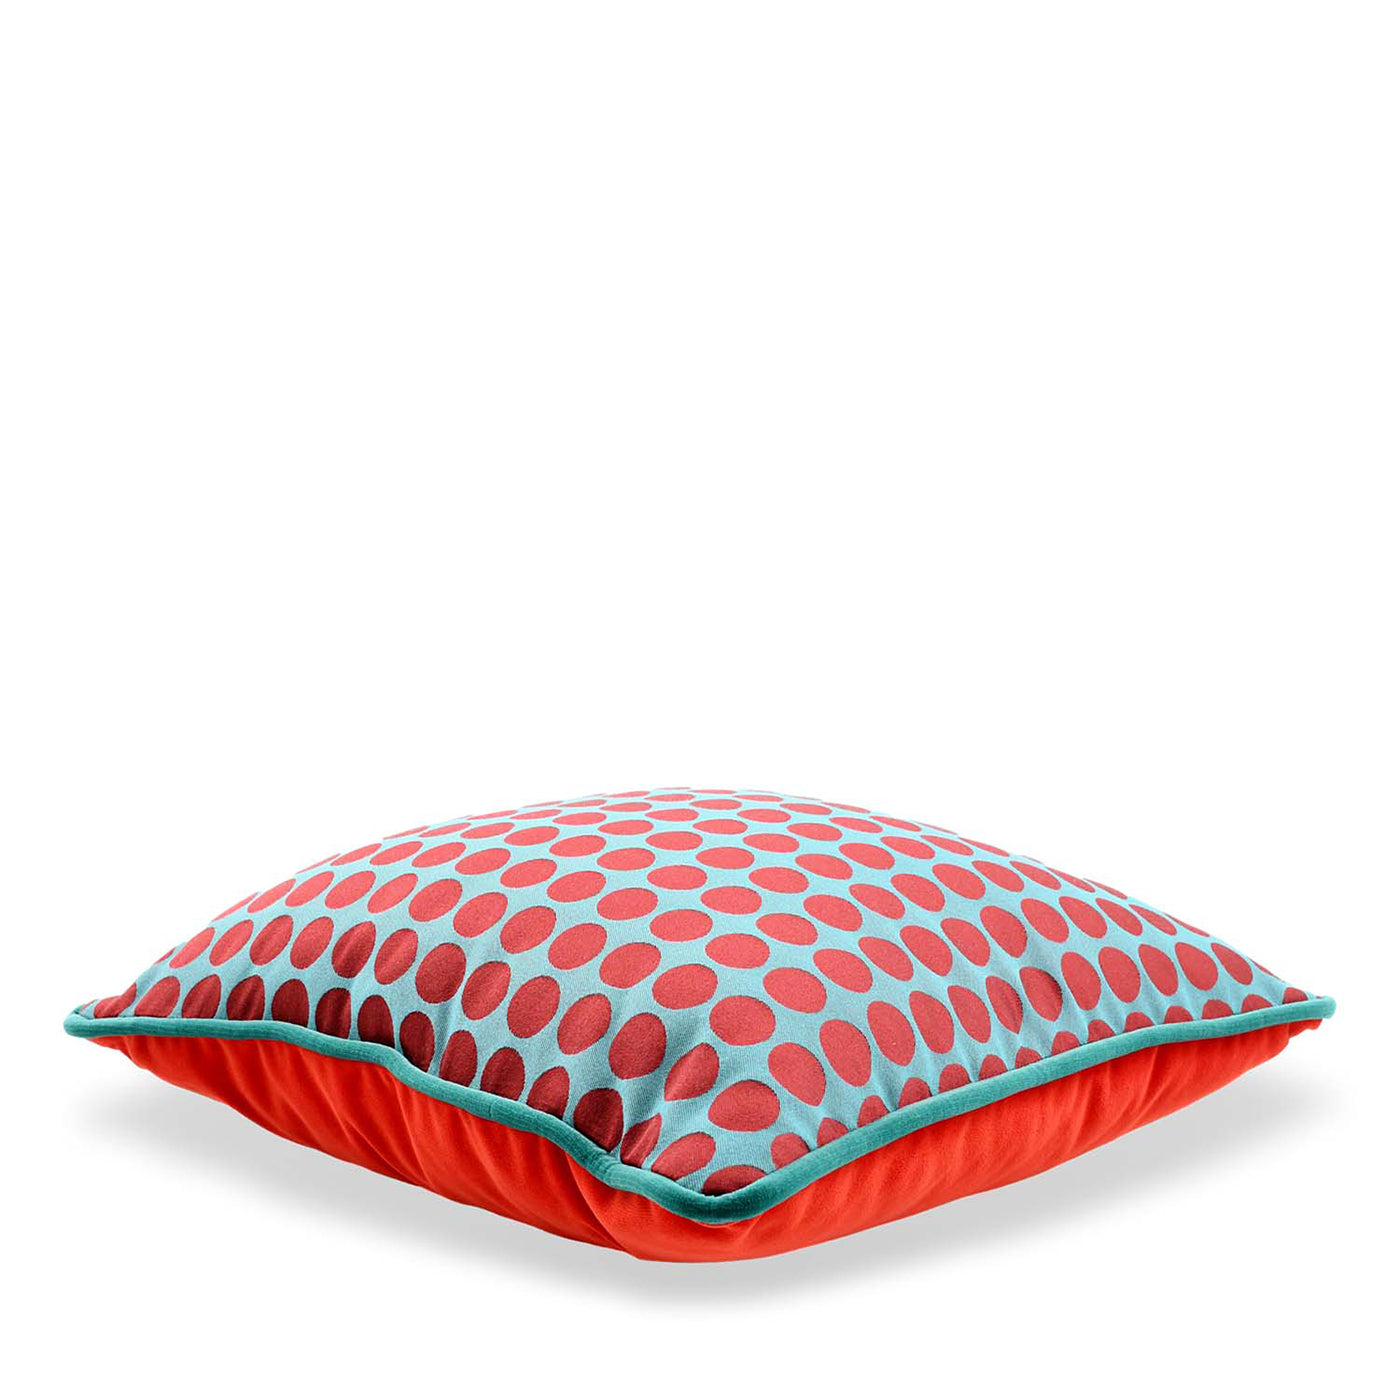 Light Blue and Red Carrè Cushion in polka dots jacquard fabric - Alternative view 2